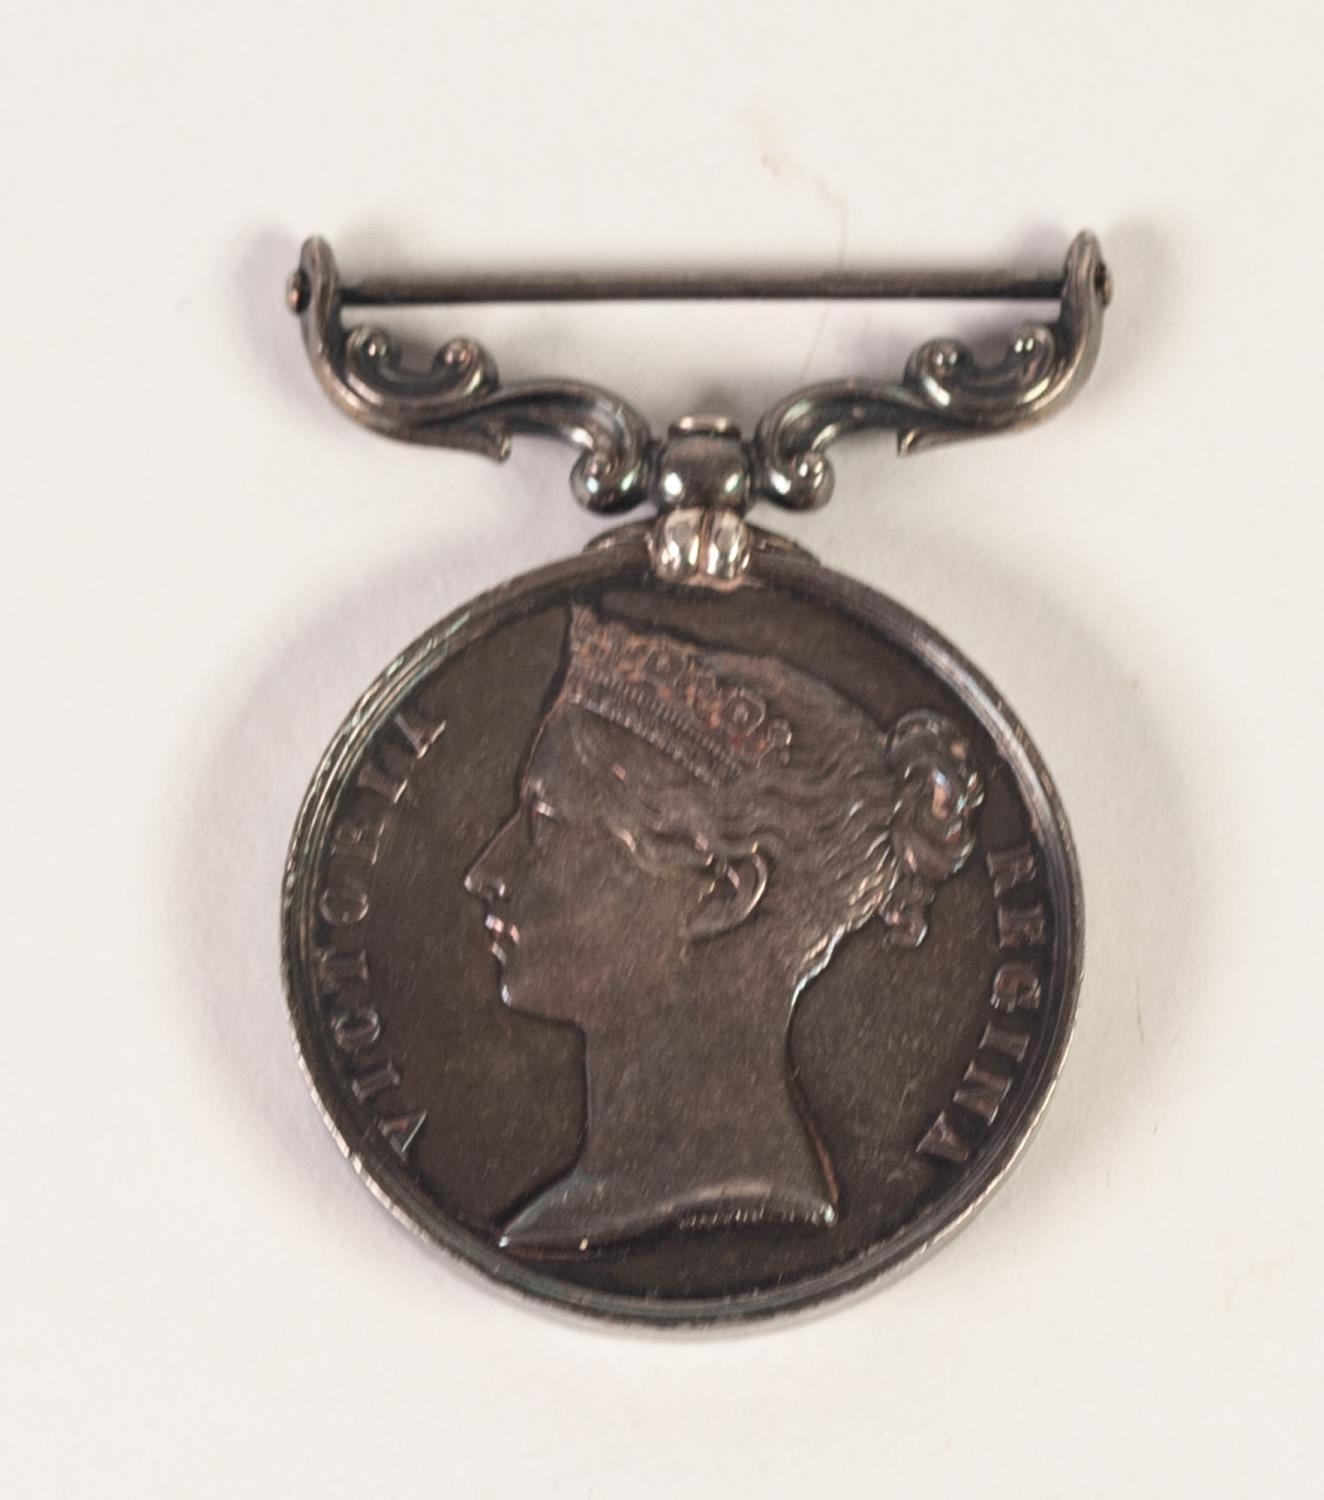 VICTORIA 'BALTIC MEDAL' 1854-1855, the reverse with Britannia and the Forts of Sveaboeg and - Image 2 of 2